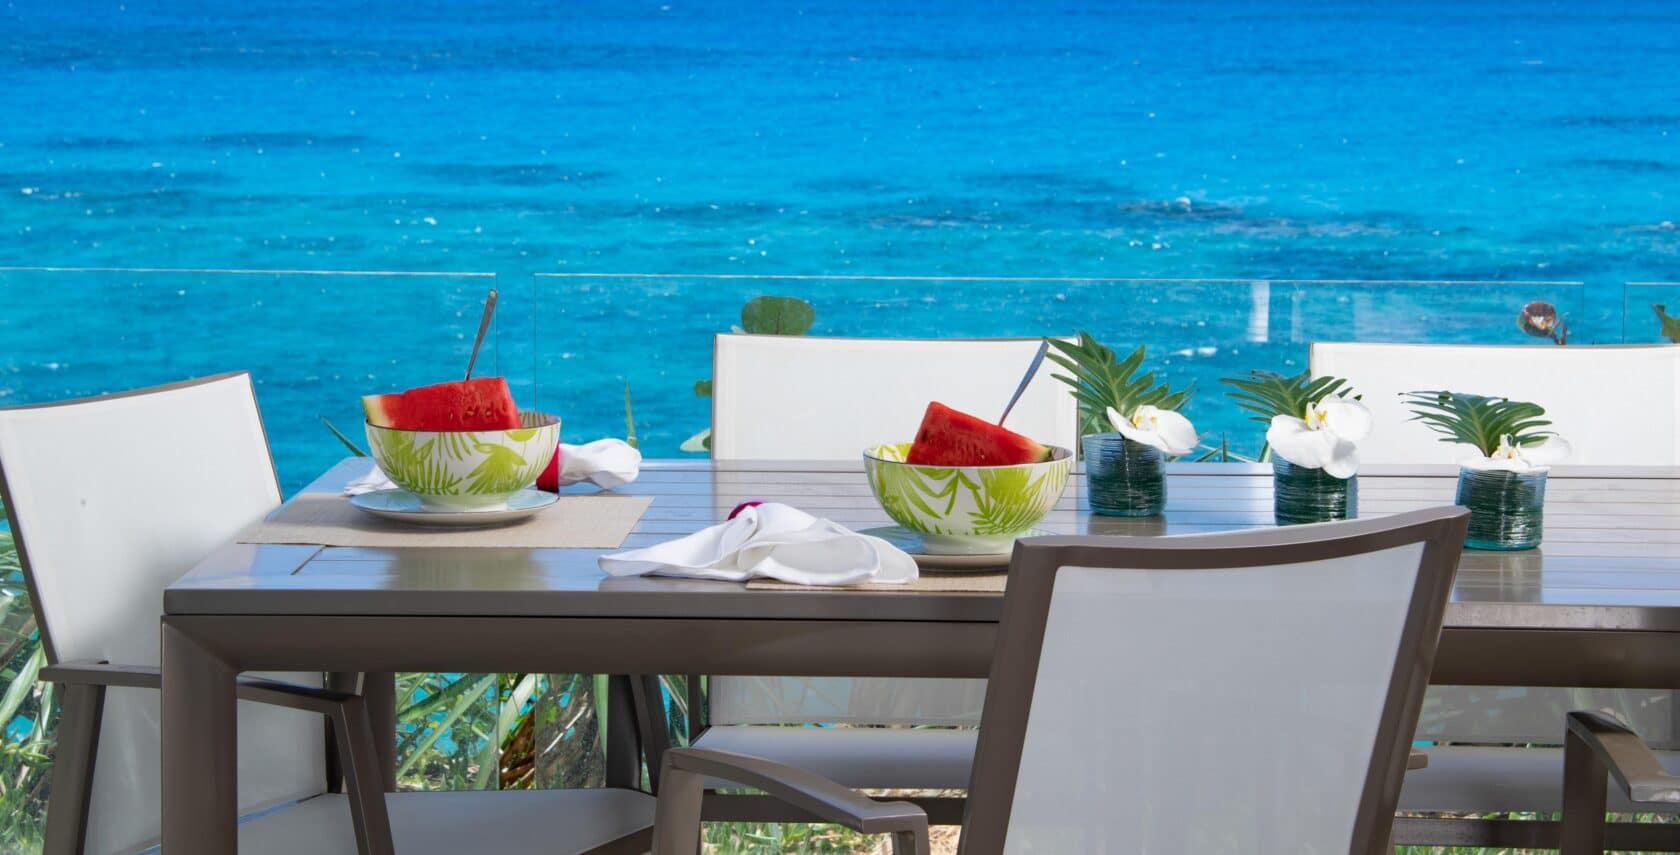 A dining table outside with a view of the ocean in the background.